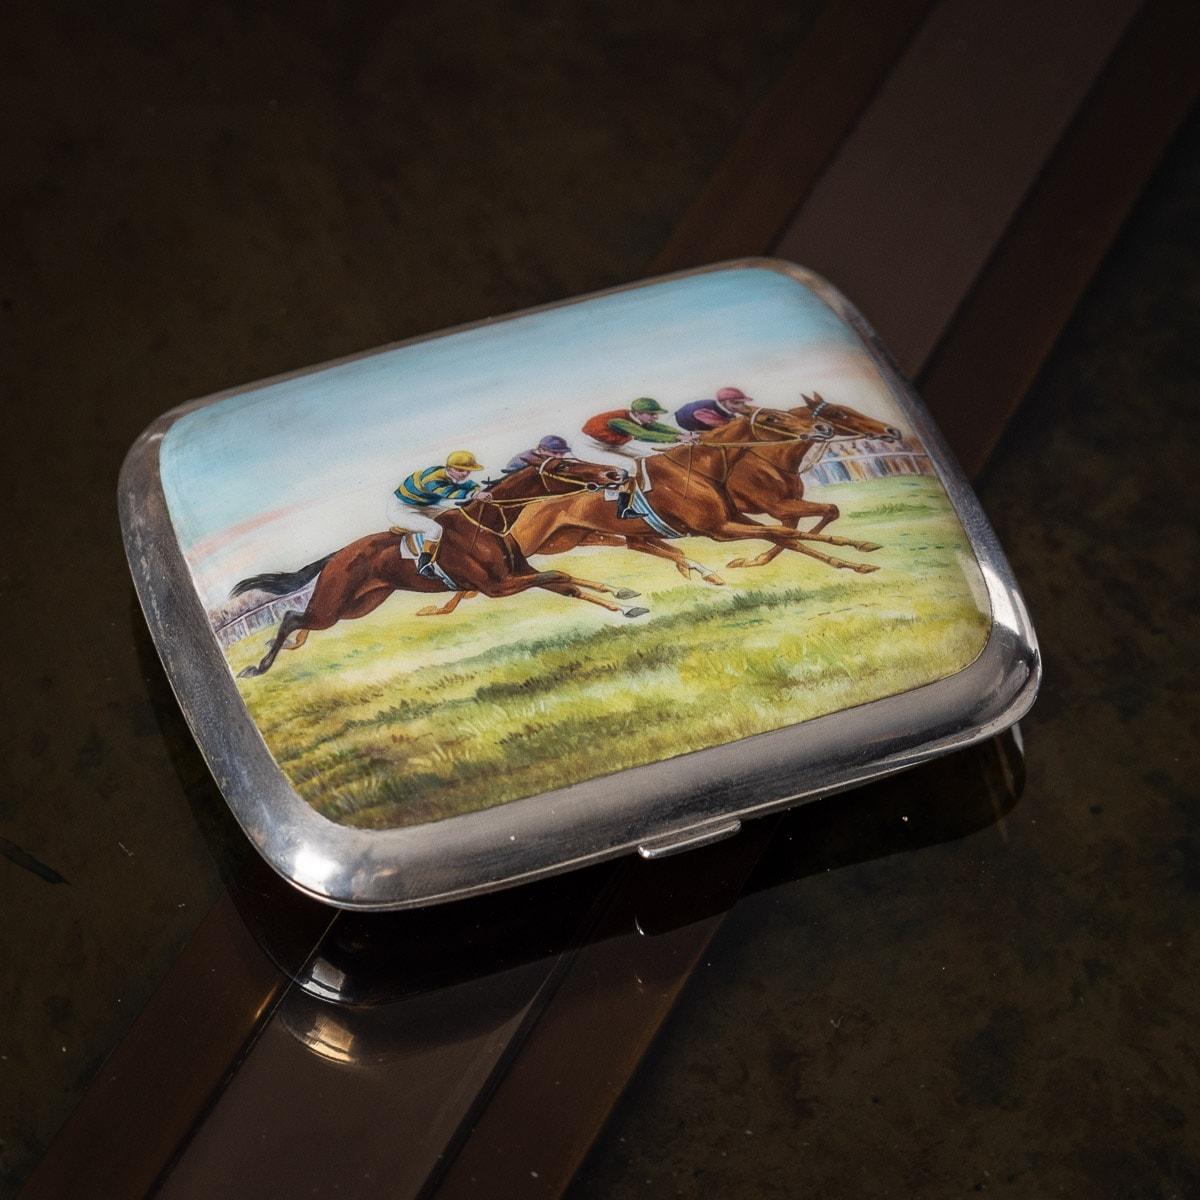 Antique early 20th Century German solid silver & enamel cigarette case, of slightly cushioned rectangular form with rounded corners, depicting a three horse race and richly parcel gilt interior. Both sides are Hallmarked German silver (935